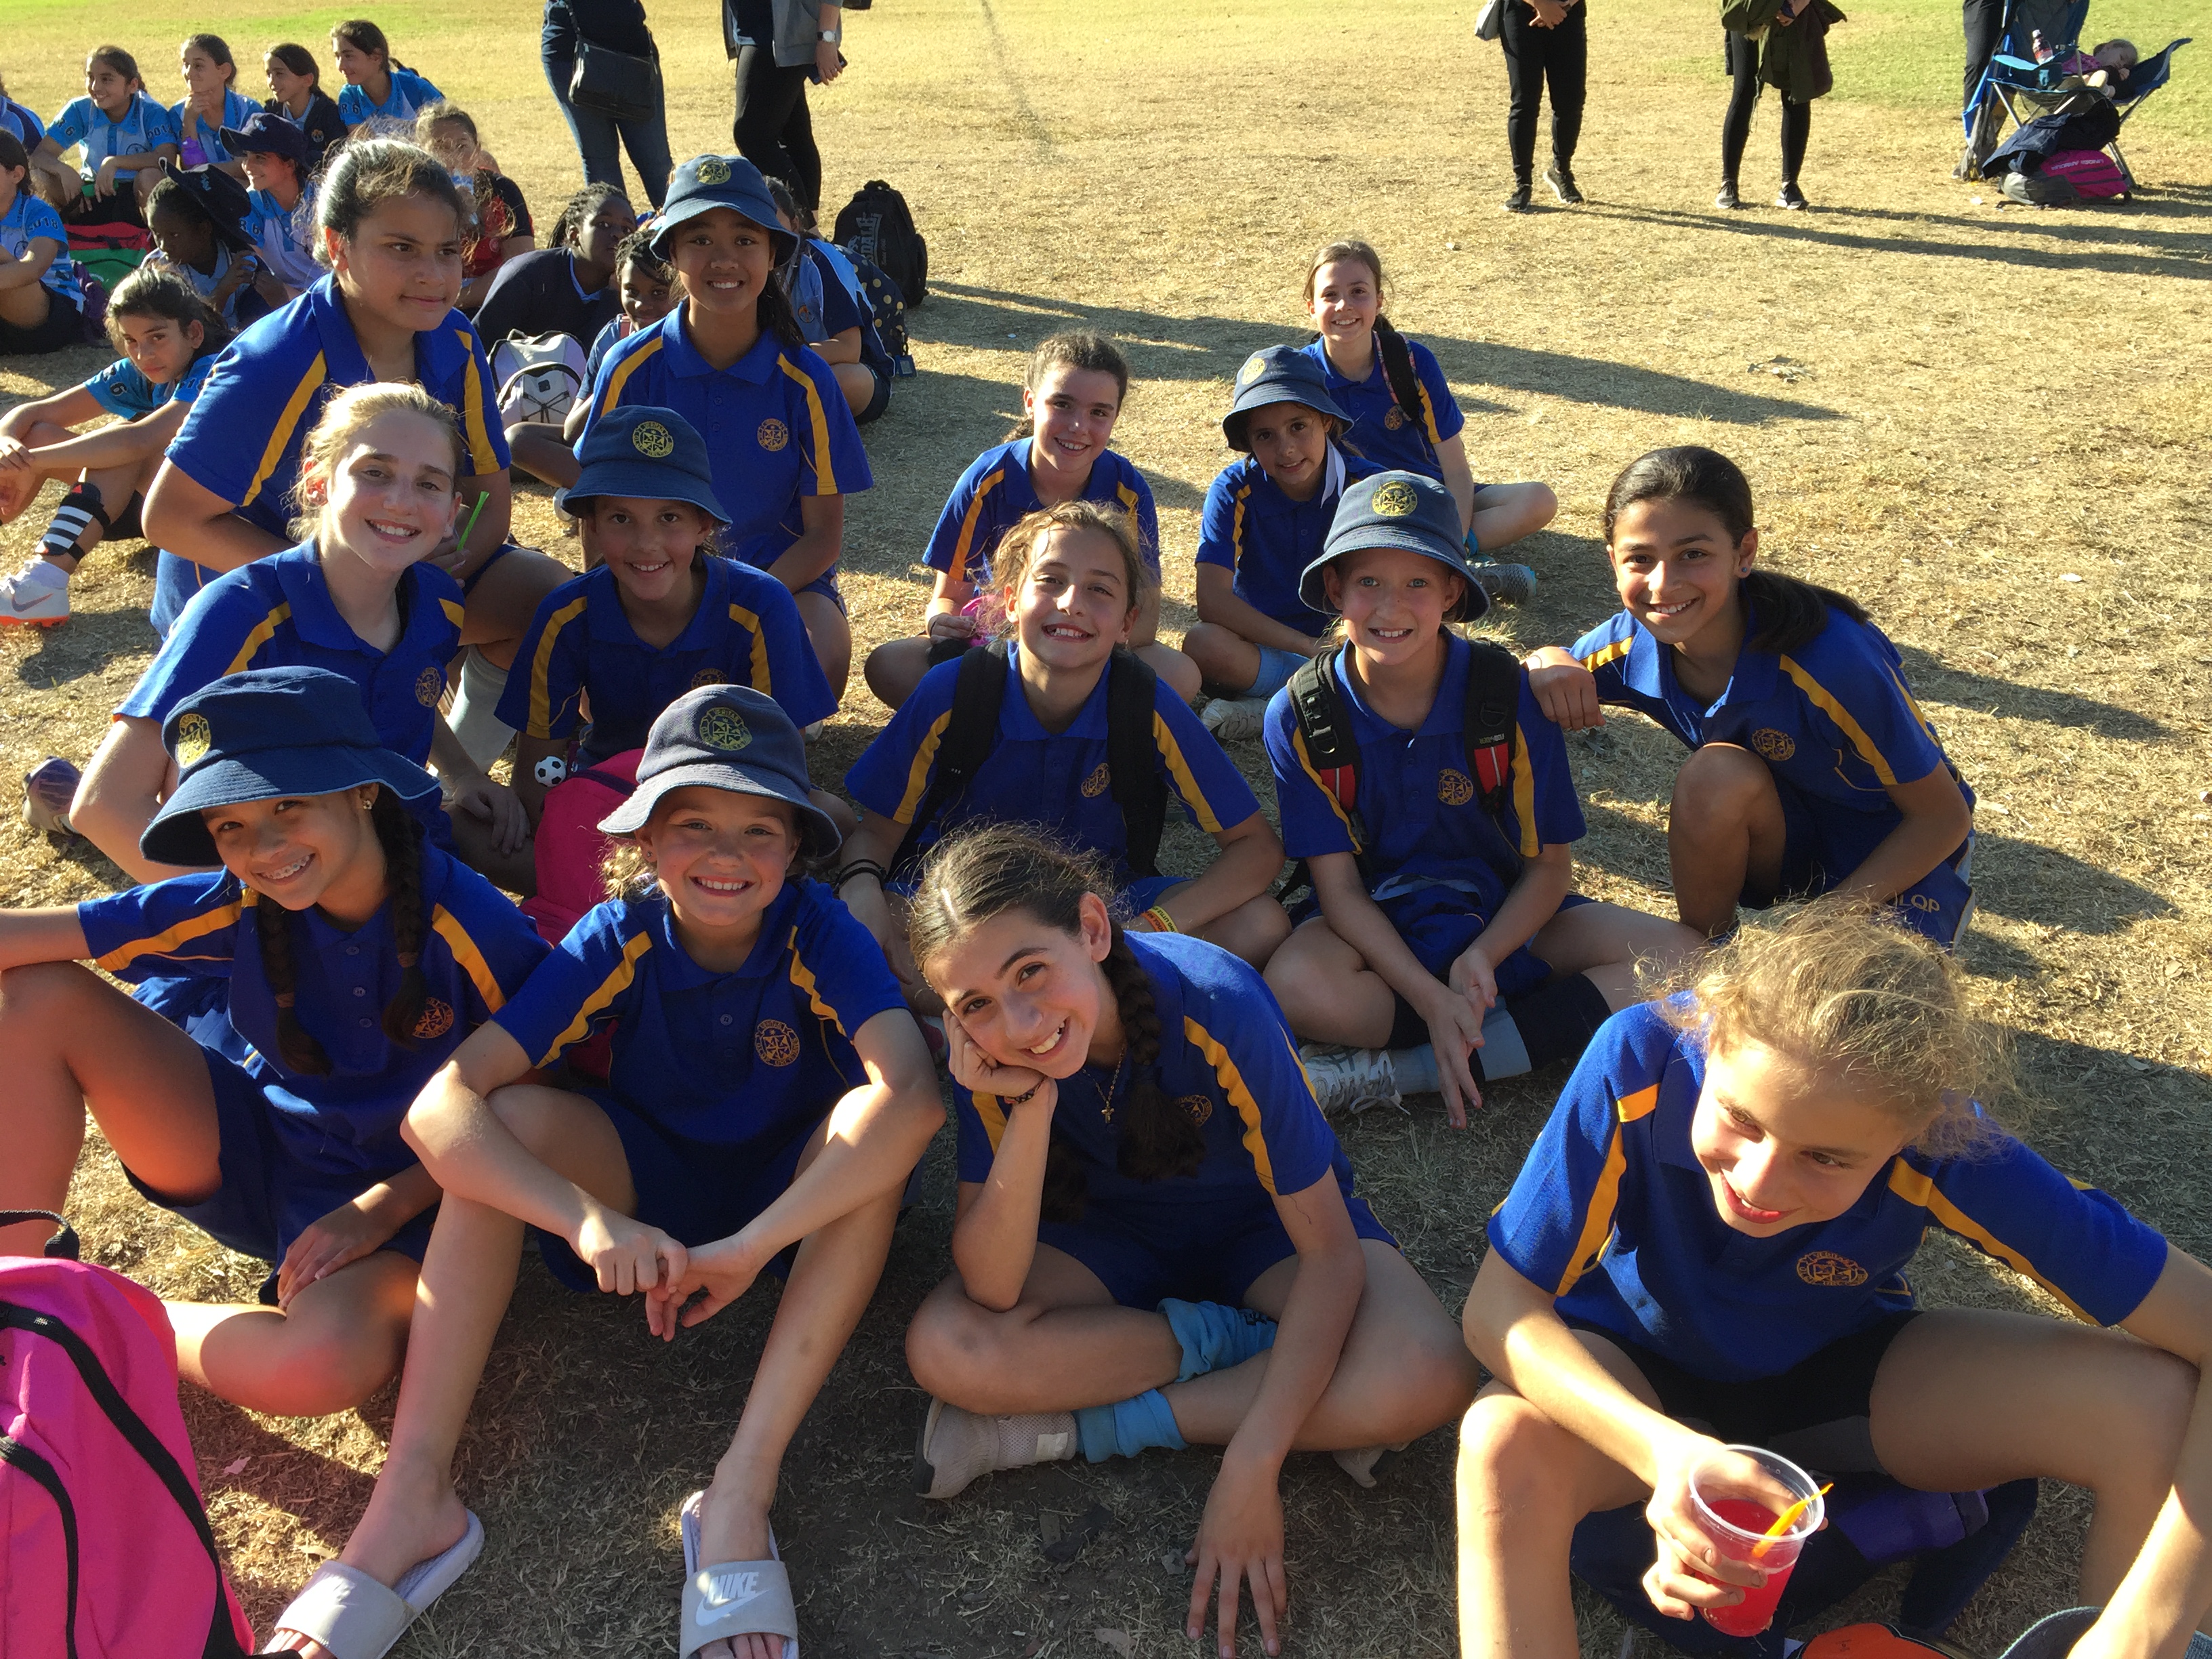 The girls hanging out at the soccer gala day